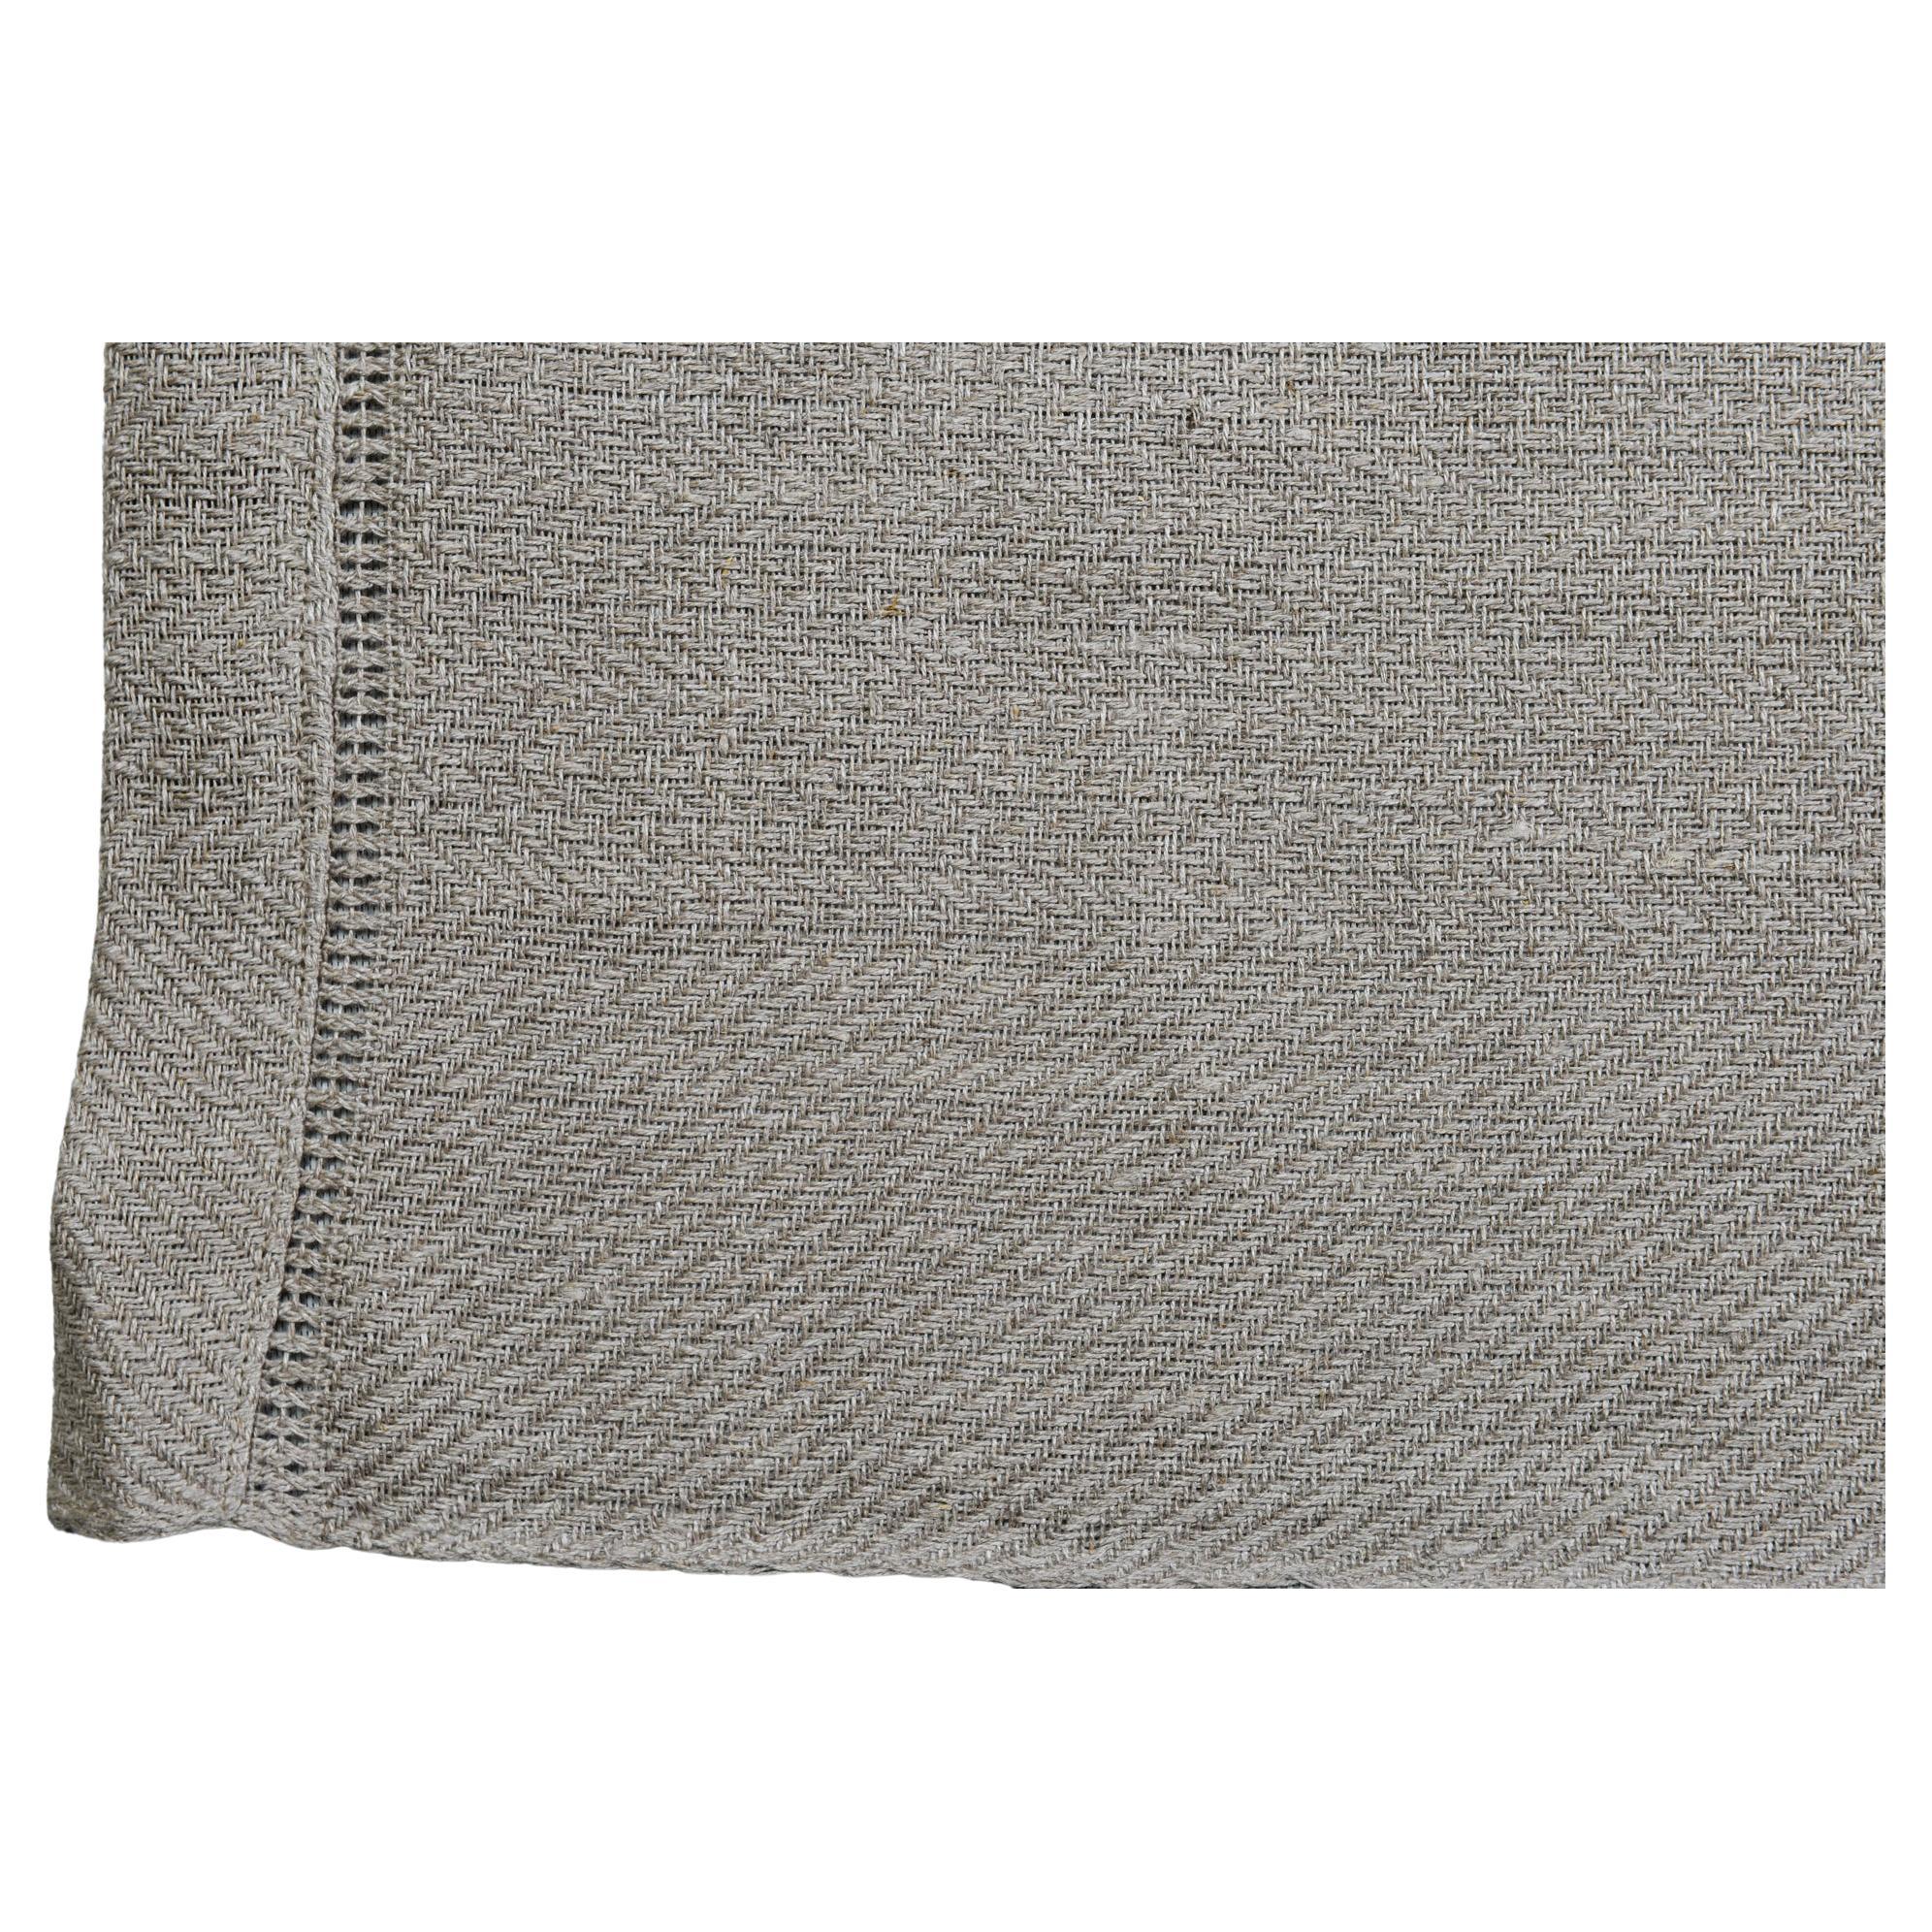 Other Ecru Linen Table Cover from Latvia For Sale